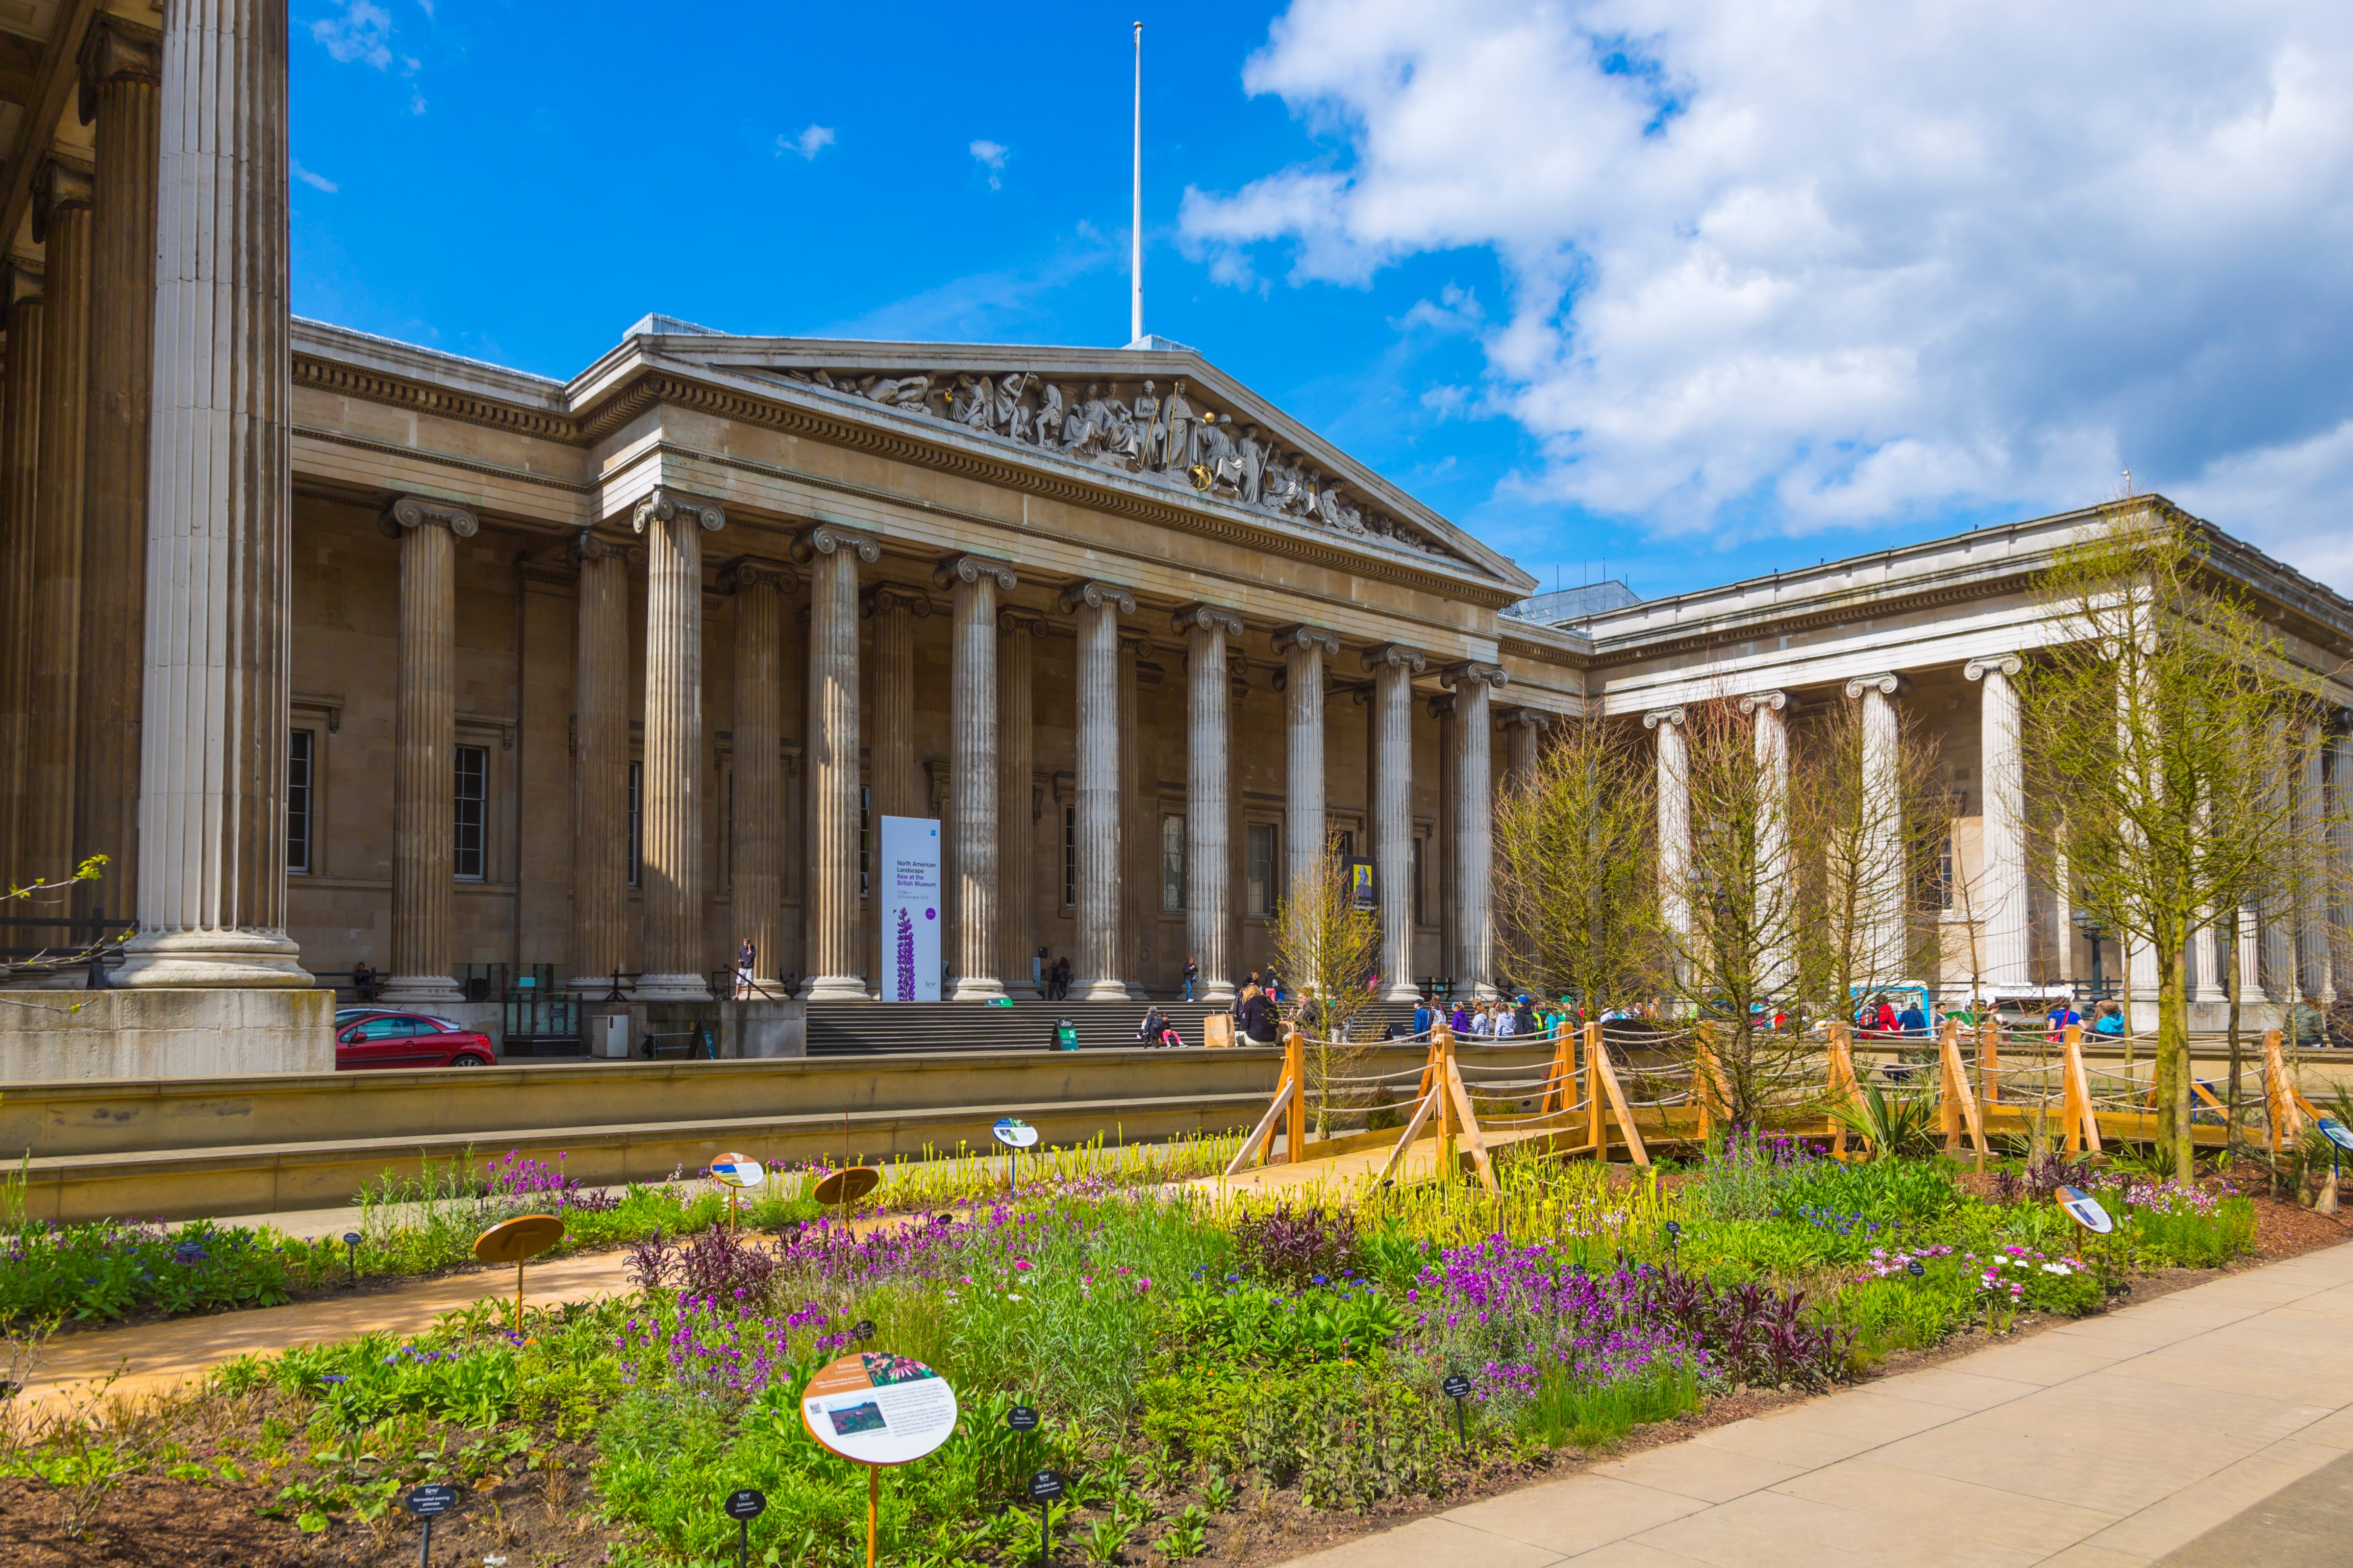 Courtyard of the British Museum in London, England, United Kingdom. (Pawel Libera—Getty Images/VisitBritain RM)